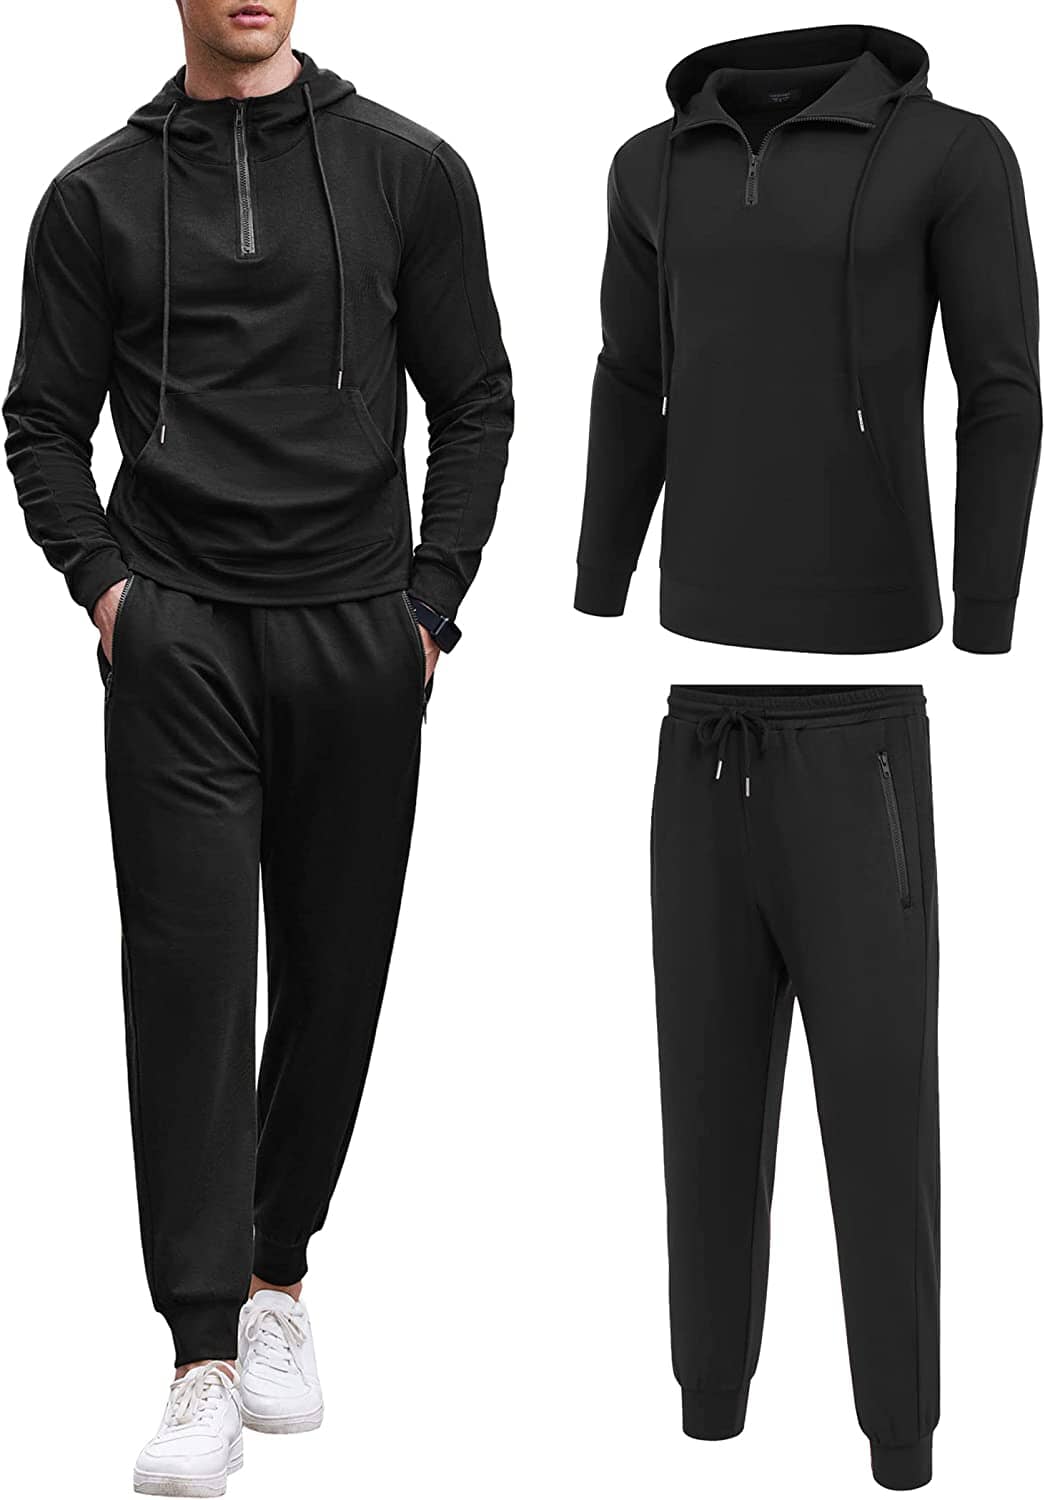 2 Piece Zip Hoodie and Sweatpants Set (US Only) Sports Set COOFANDY Store Black S 